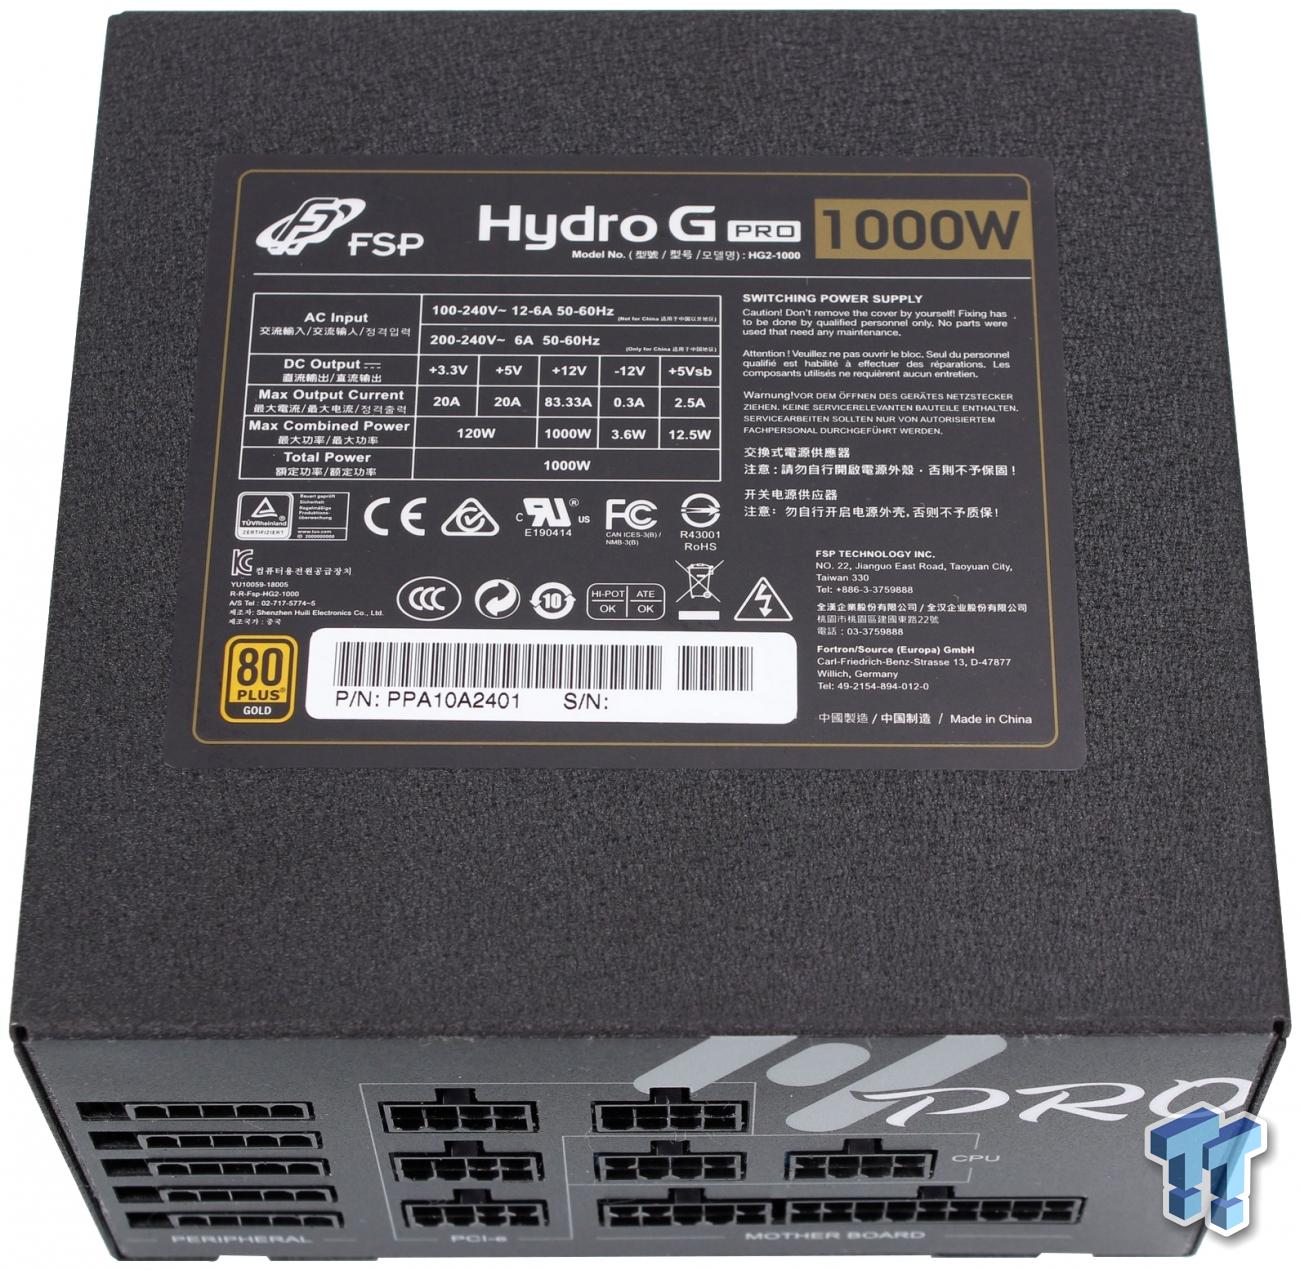 FSP Hydro G PRO 1000W Power Supply Review